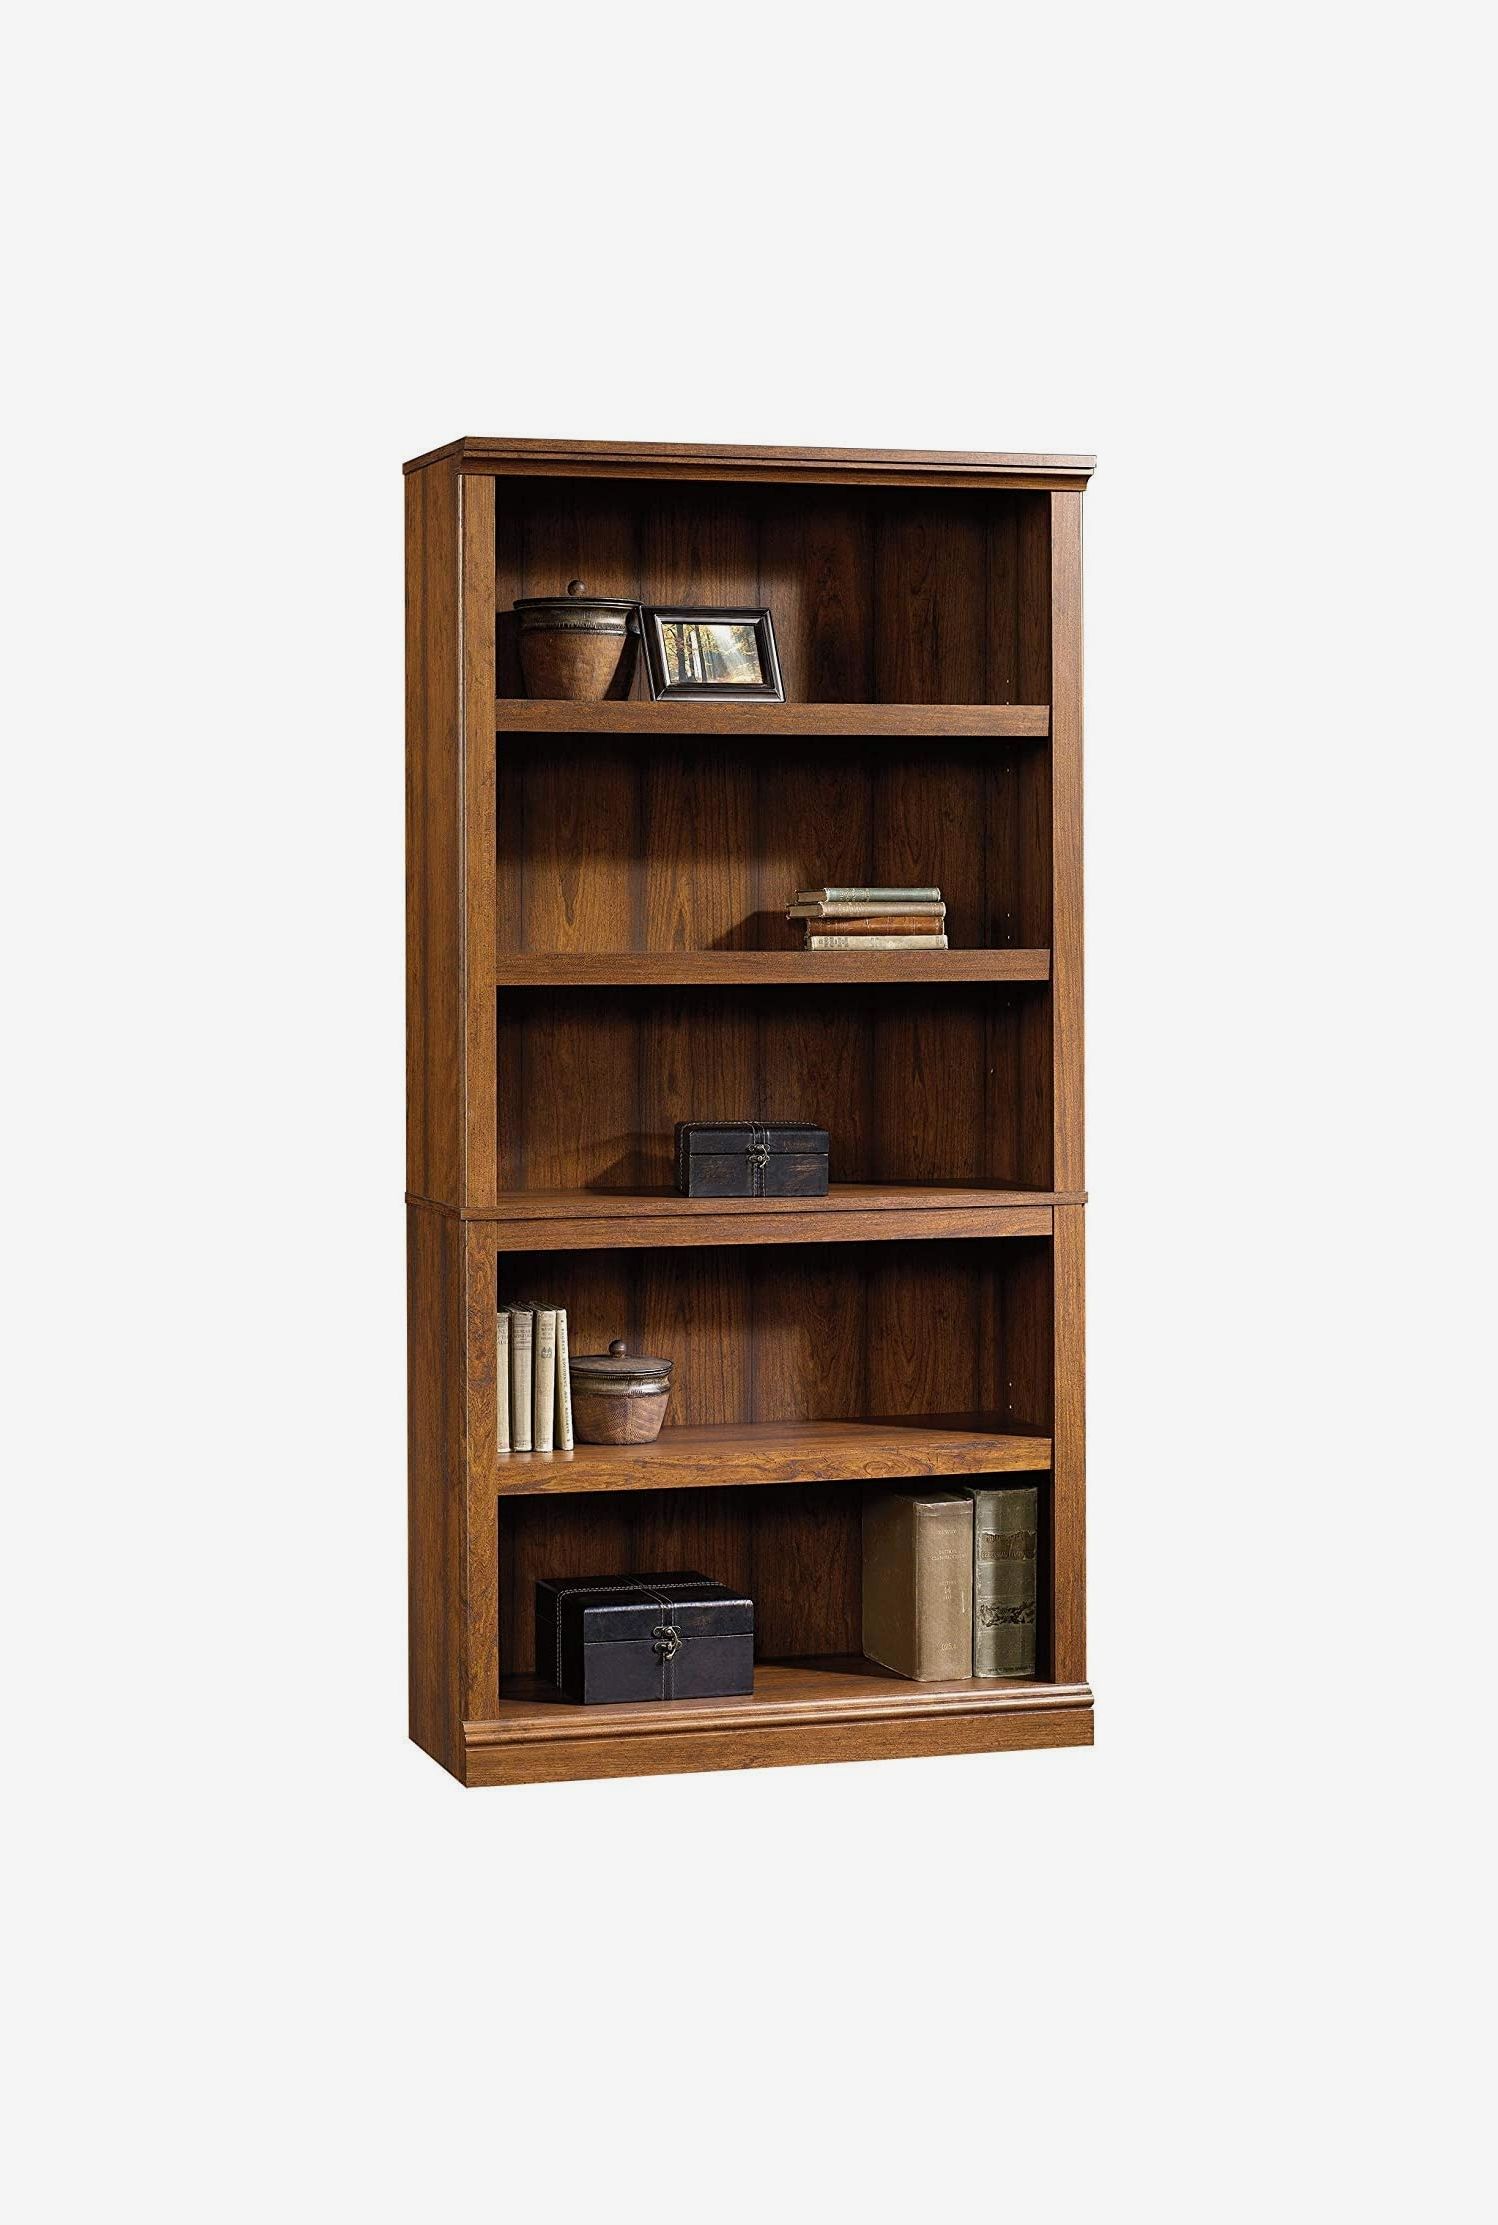 A free-standing bookcase with barrier shelving to ensure that all your  books stand up straight and sturdy.